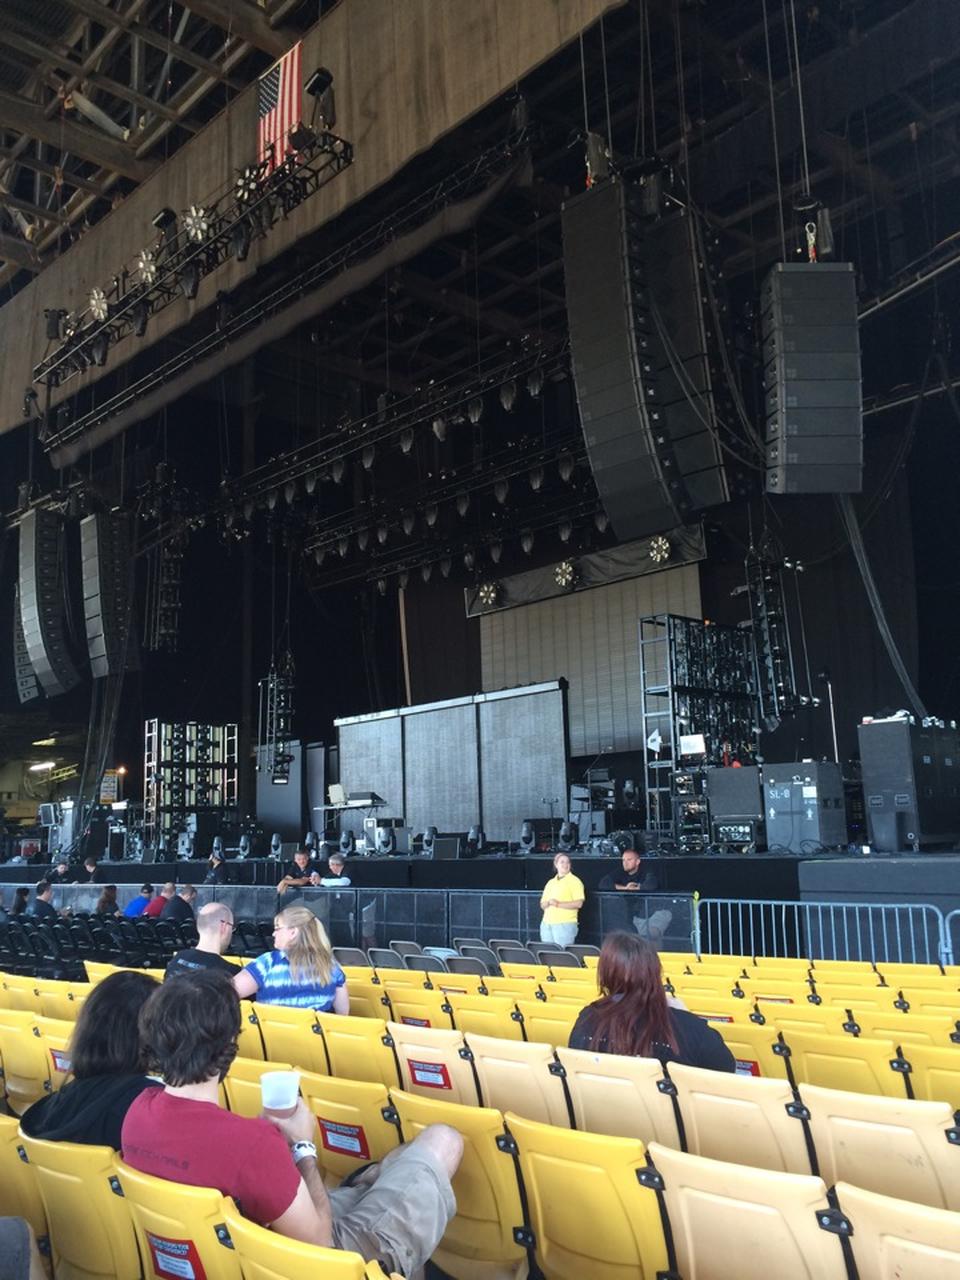 Hollywood Casino Amphitheater Interactive Seating Chart